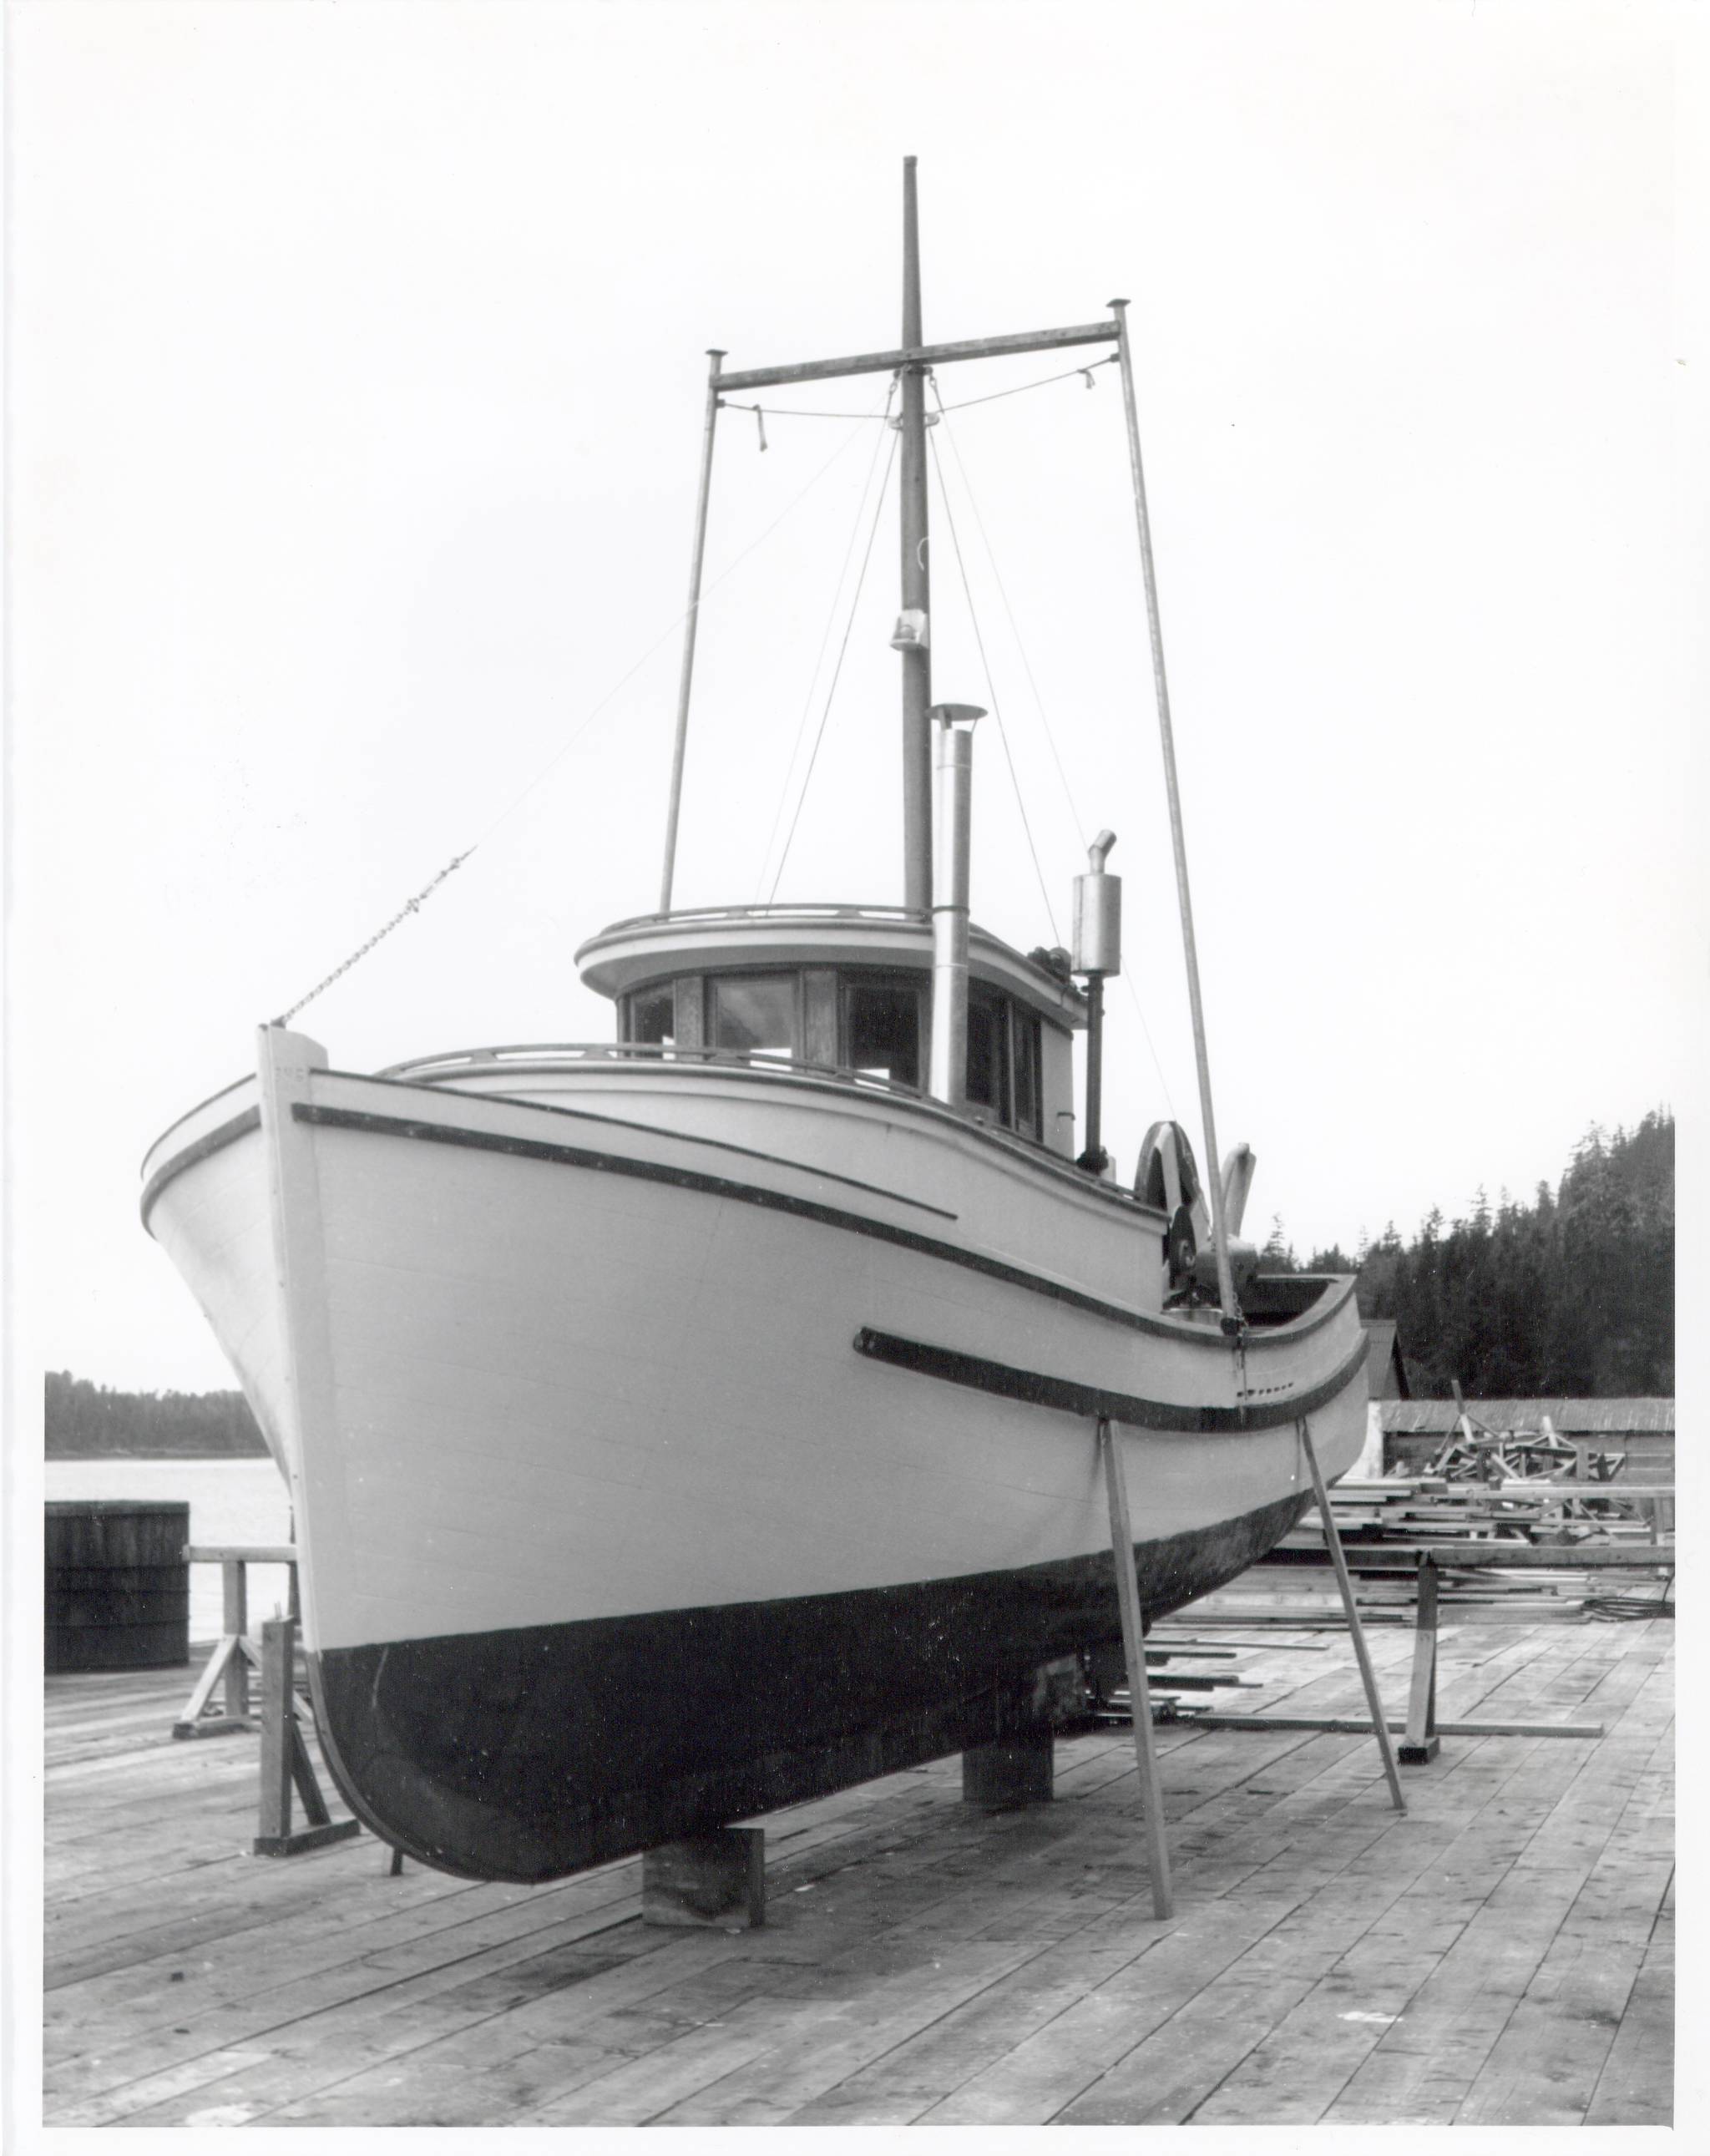 14327510_web1_Wahl-Gillnet-Boat-Delivered-to-North-Pacific-Cannery--Photo-